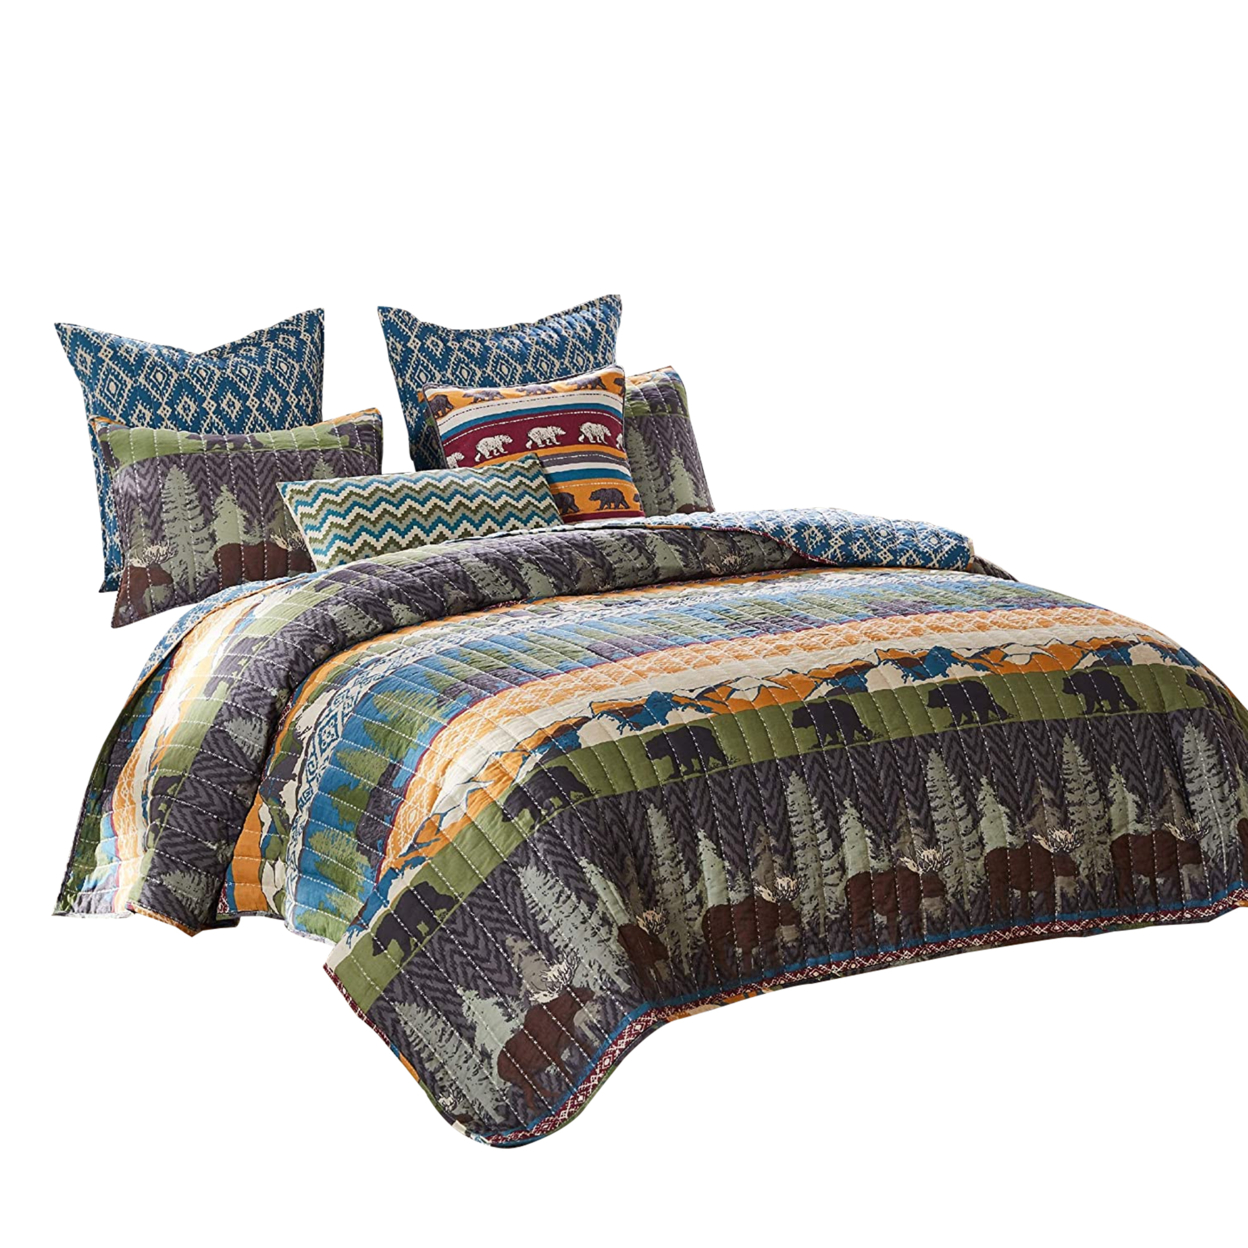 4 Piece Twin Size Quilt Set With Nature Inspired Print, Multicolor- Saltoro Sherpi